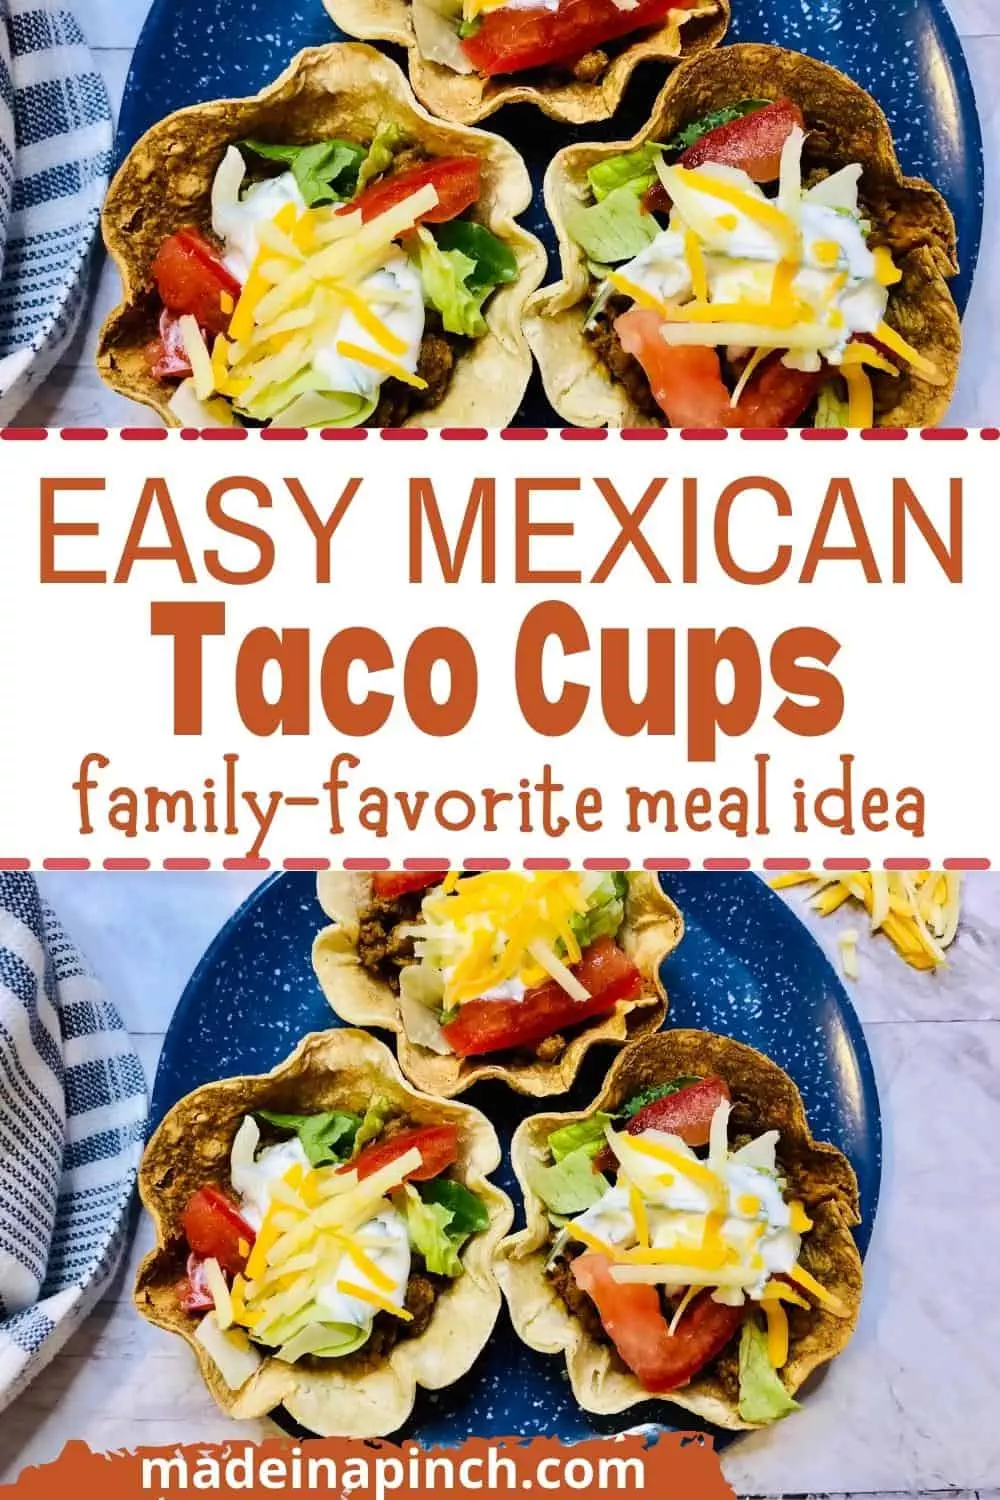 These homemade taco cups are super simple to make and equally as versatile so you can make them according to your family